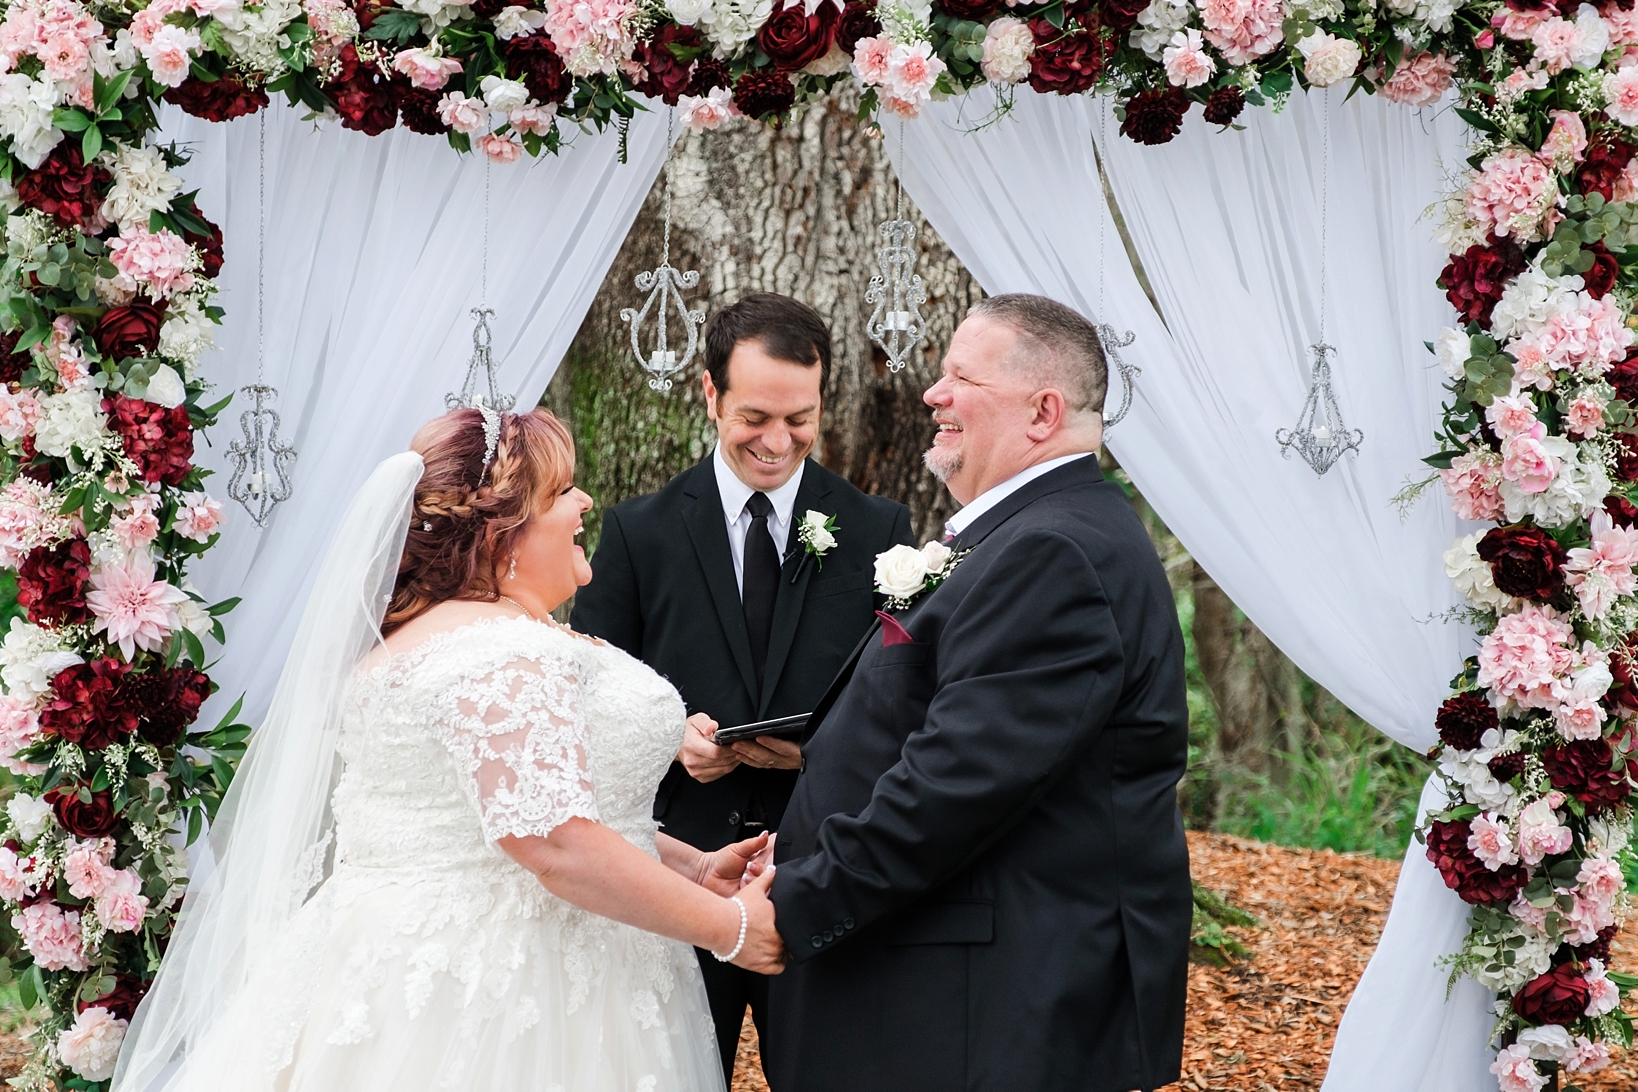 Groom laughs during his Bride's vows to him during their wedding ceremony